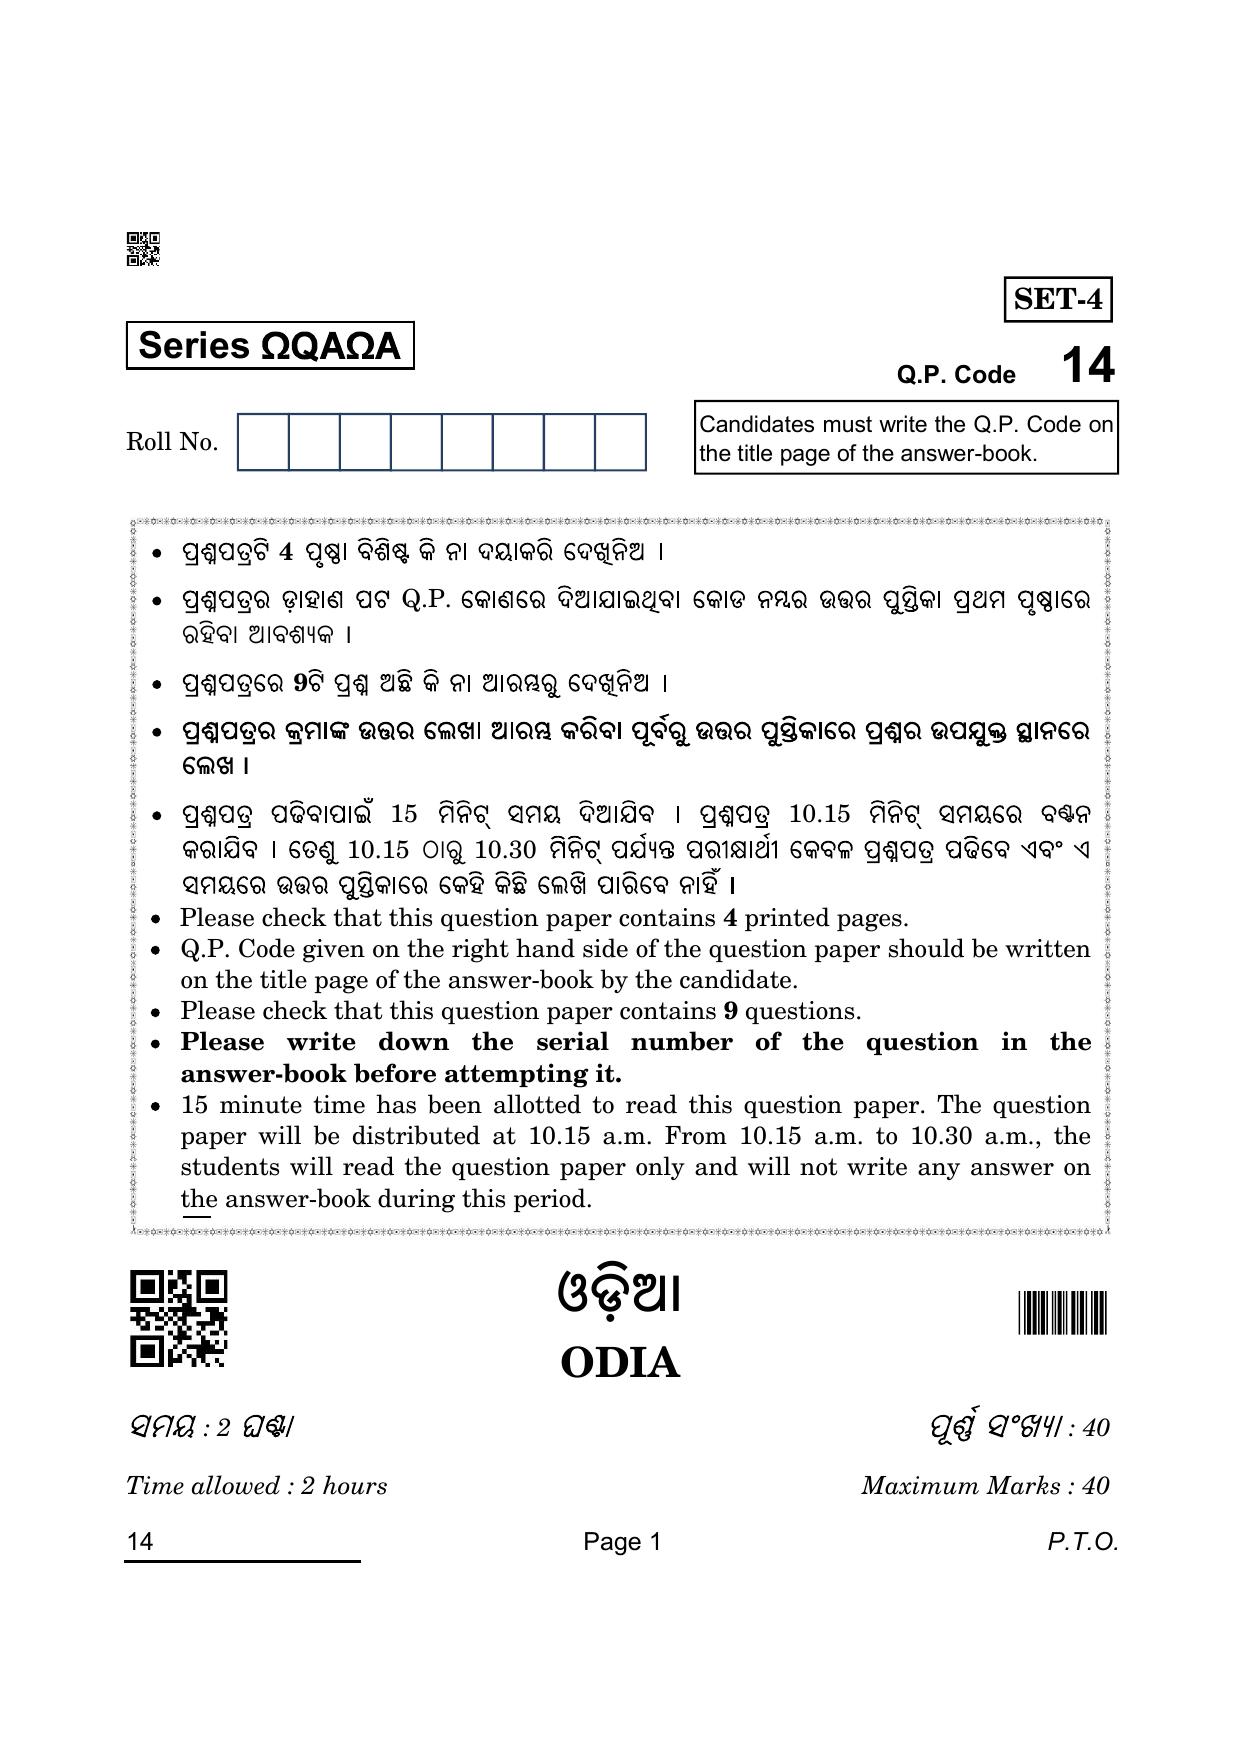 CBSE Class 10 14 Odia 2022 Question Paper - Page 1